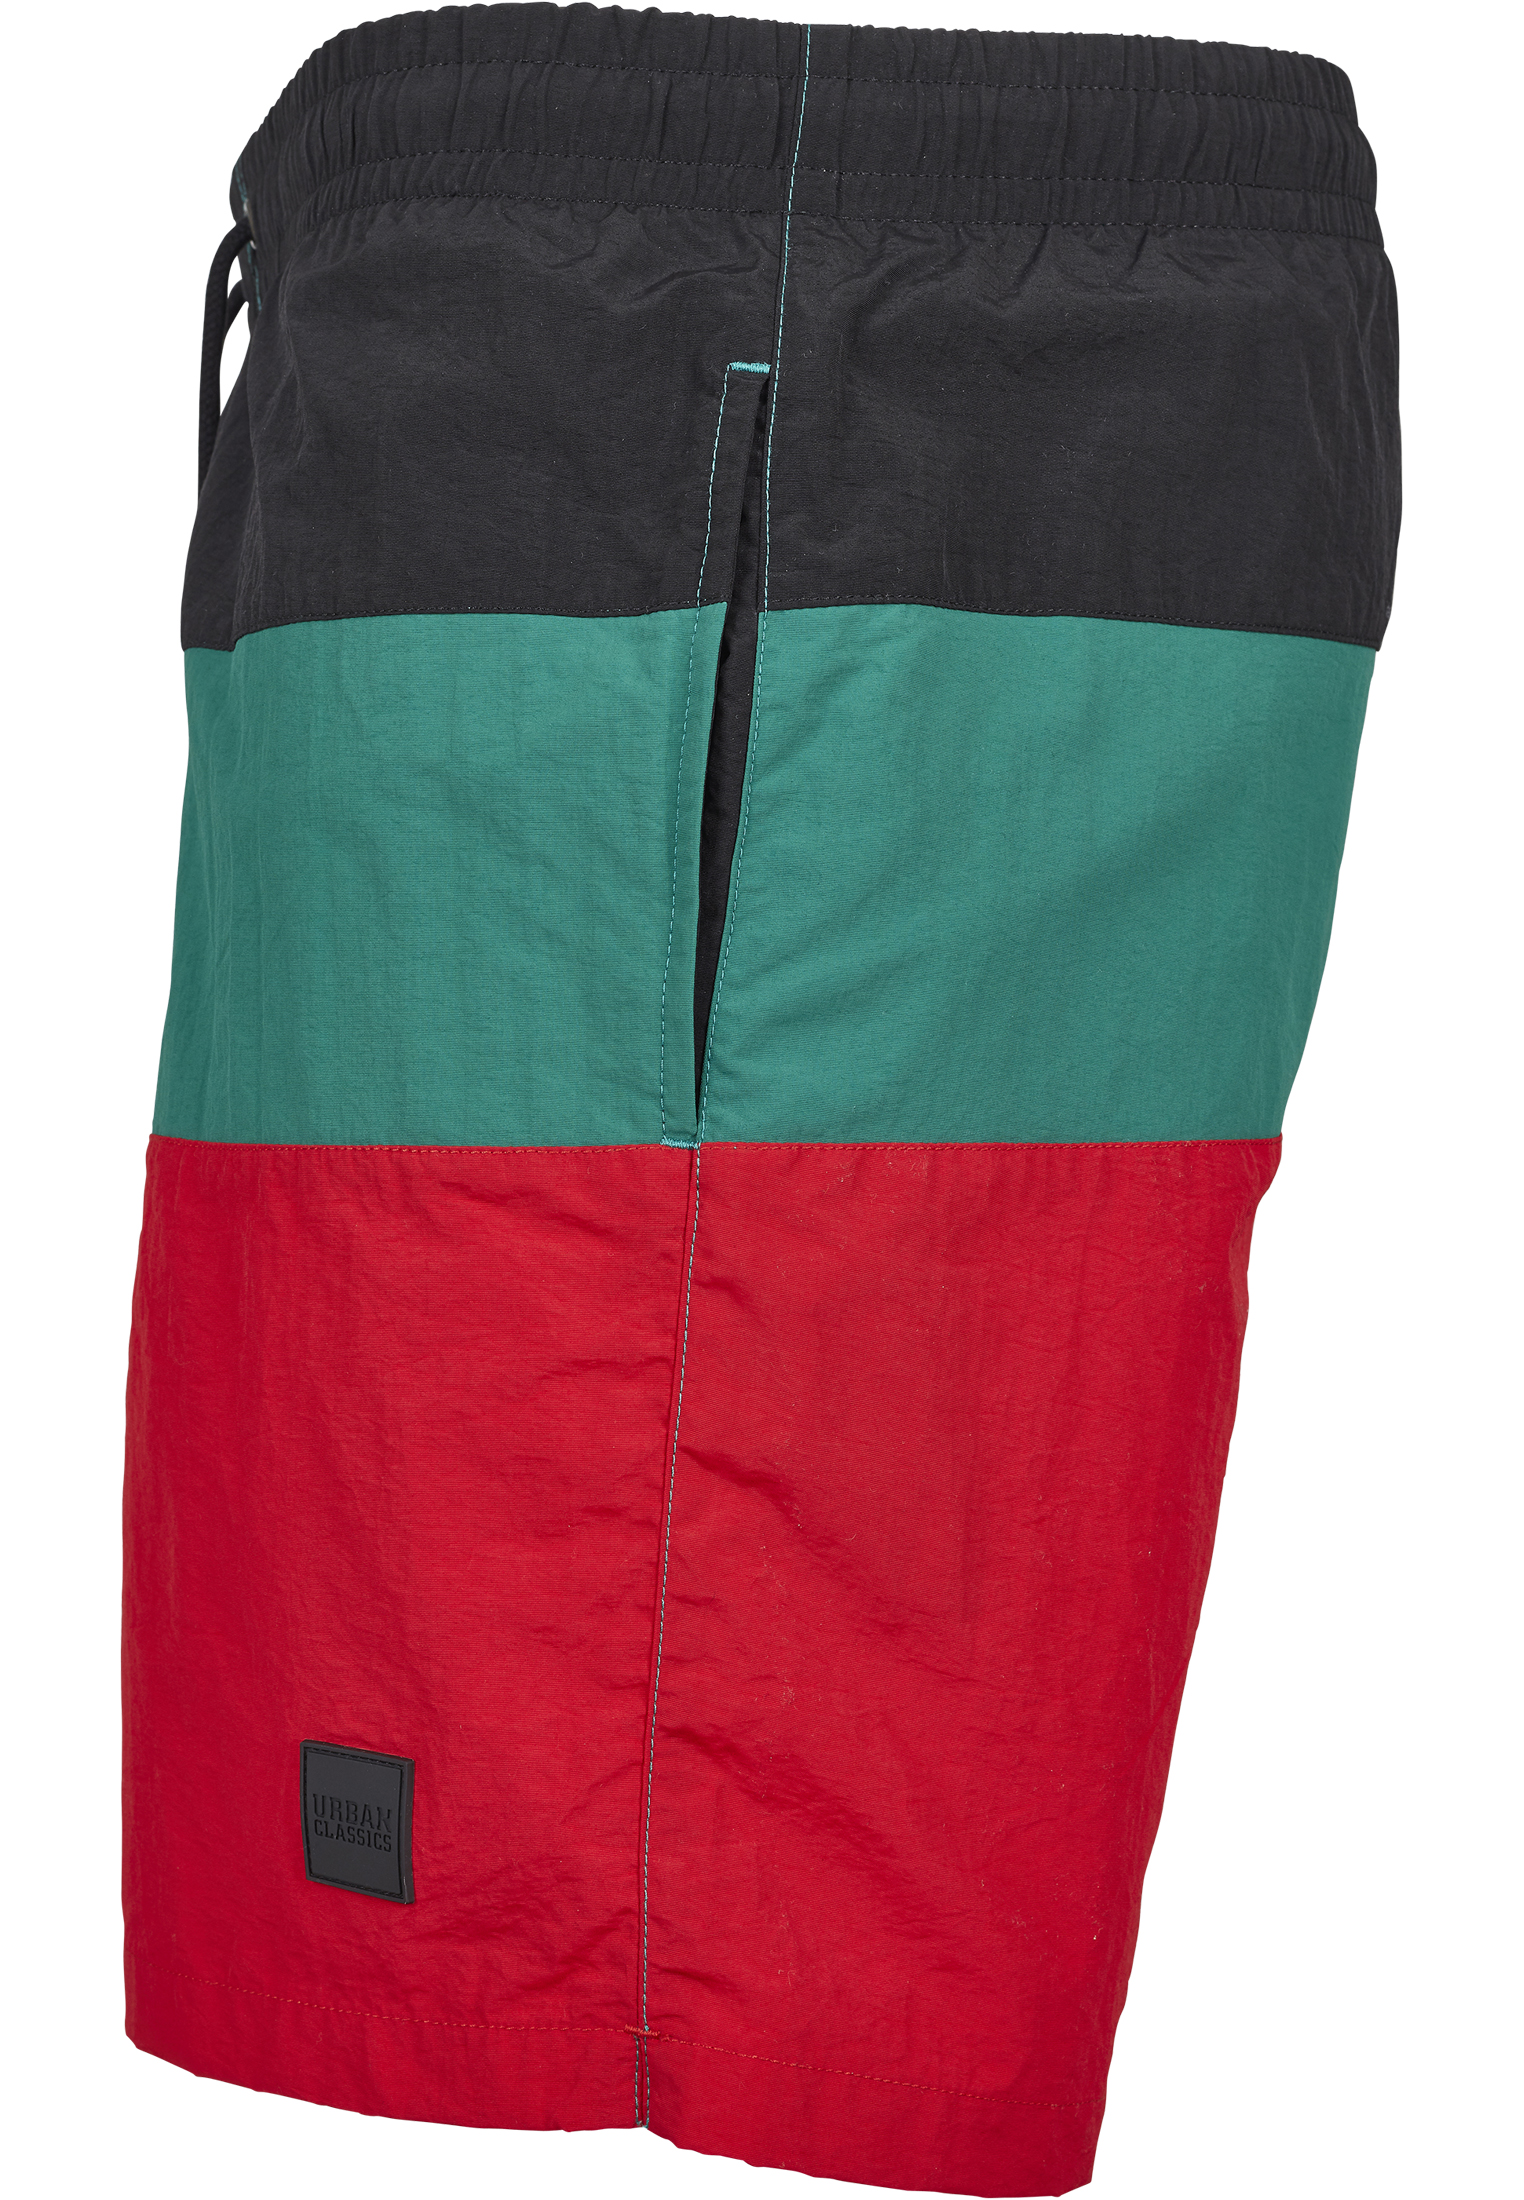 Bademode Color Block Swimshorts in Farbe firered/black/green